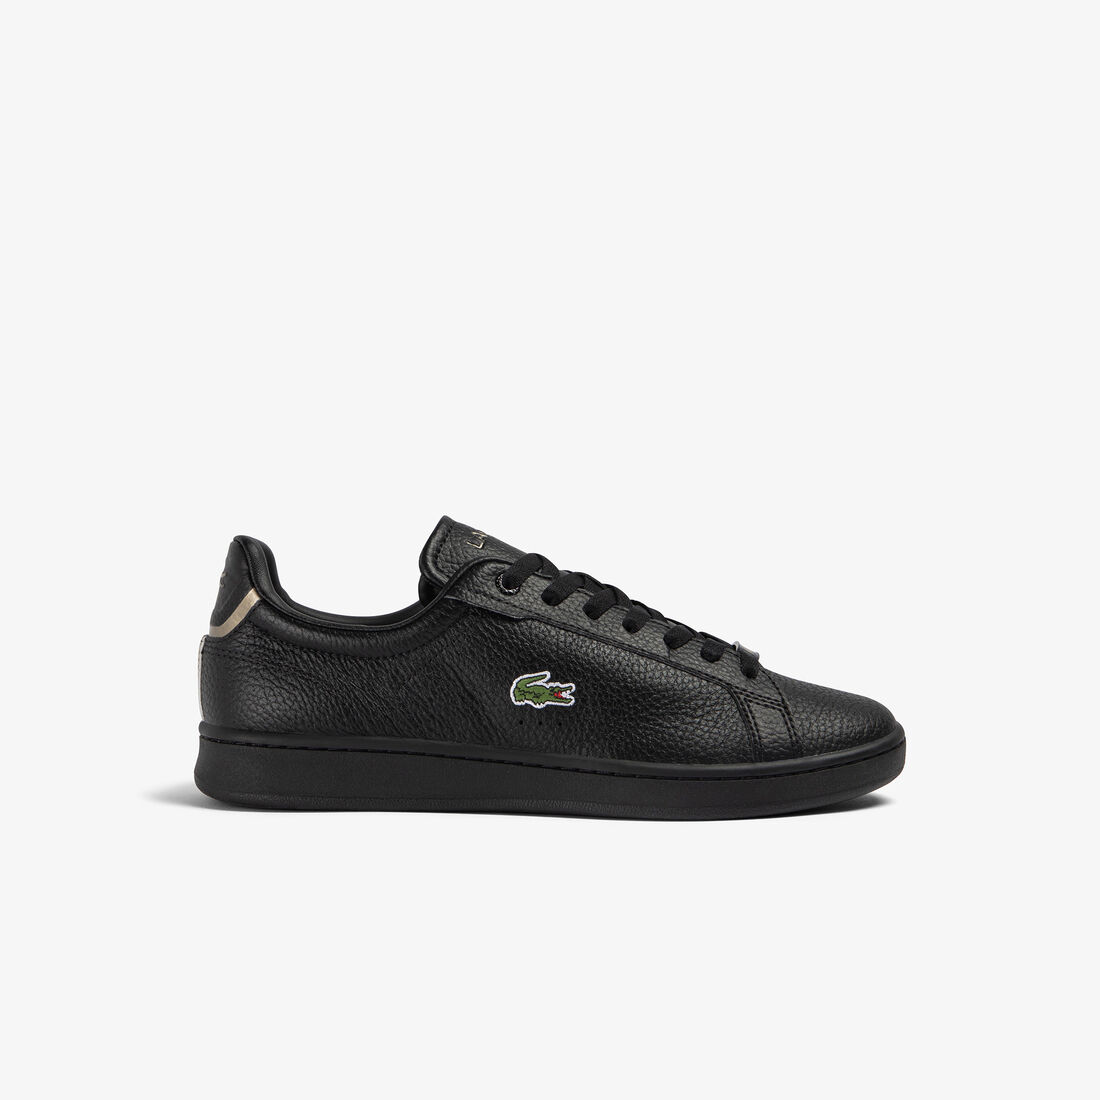 Men's Lacoste Carnaby Pro Leather Trainers - 45SMA0113-02H